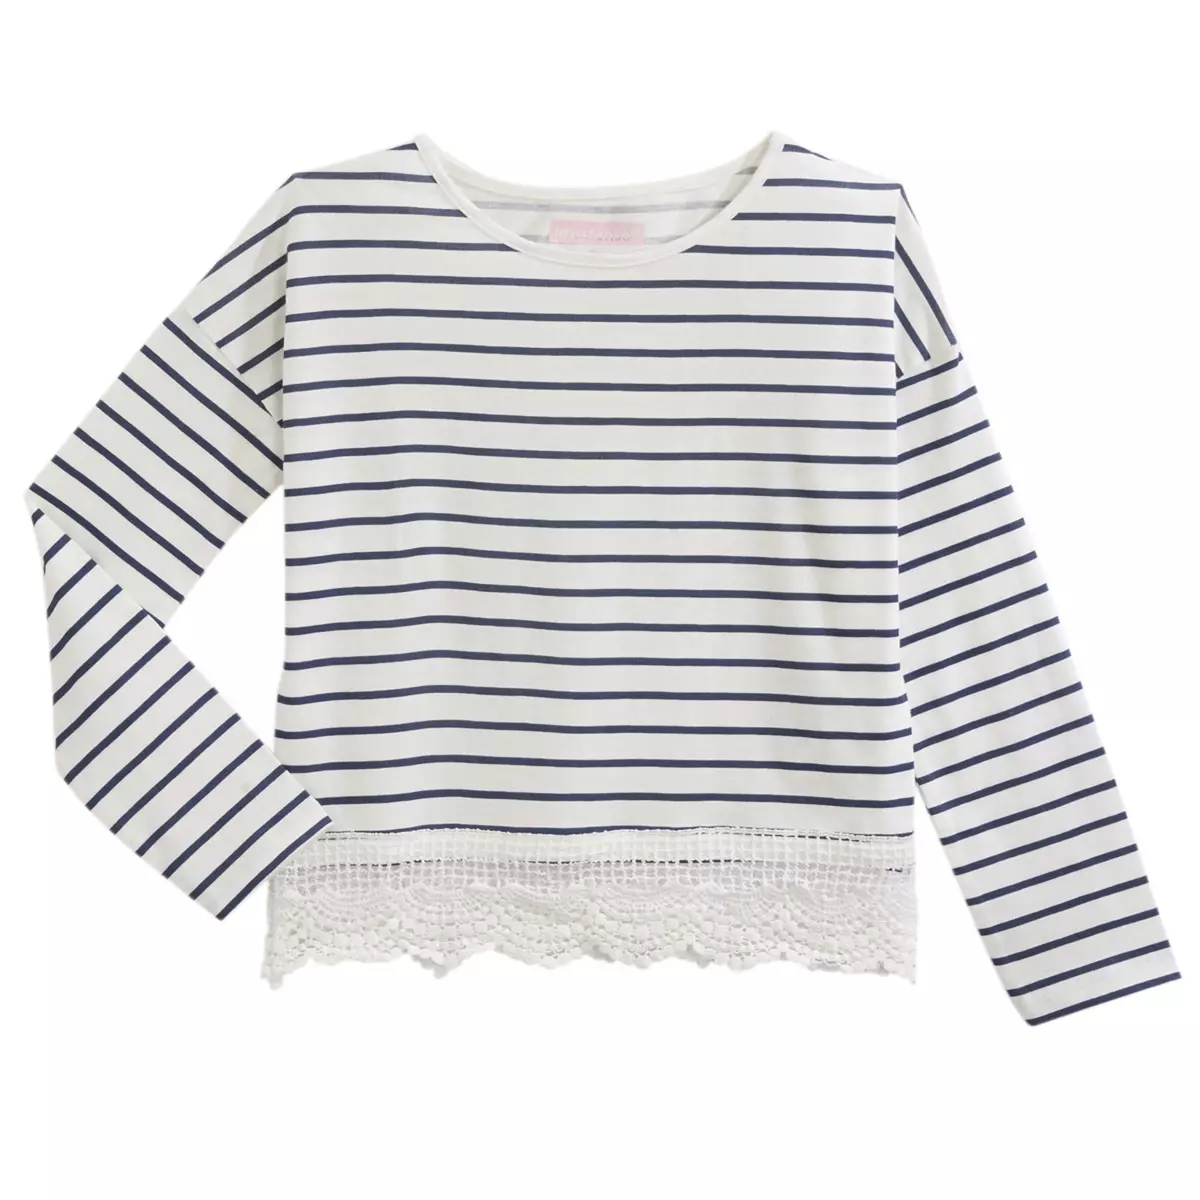 IN EXTENSO Tee-shirt manches longues macramé fille